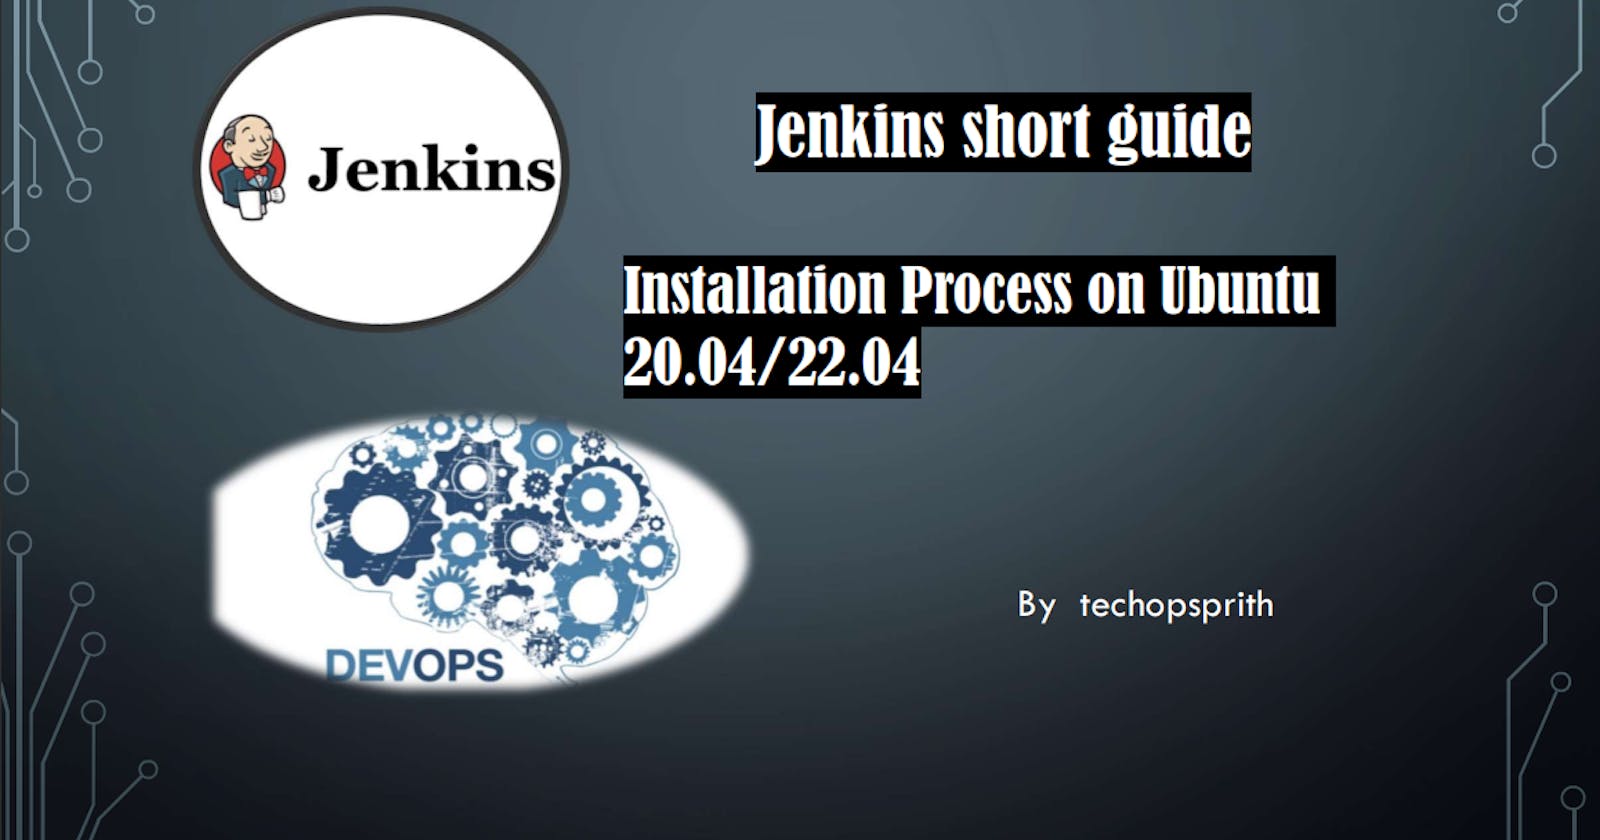 Jenkins Guide and Installation